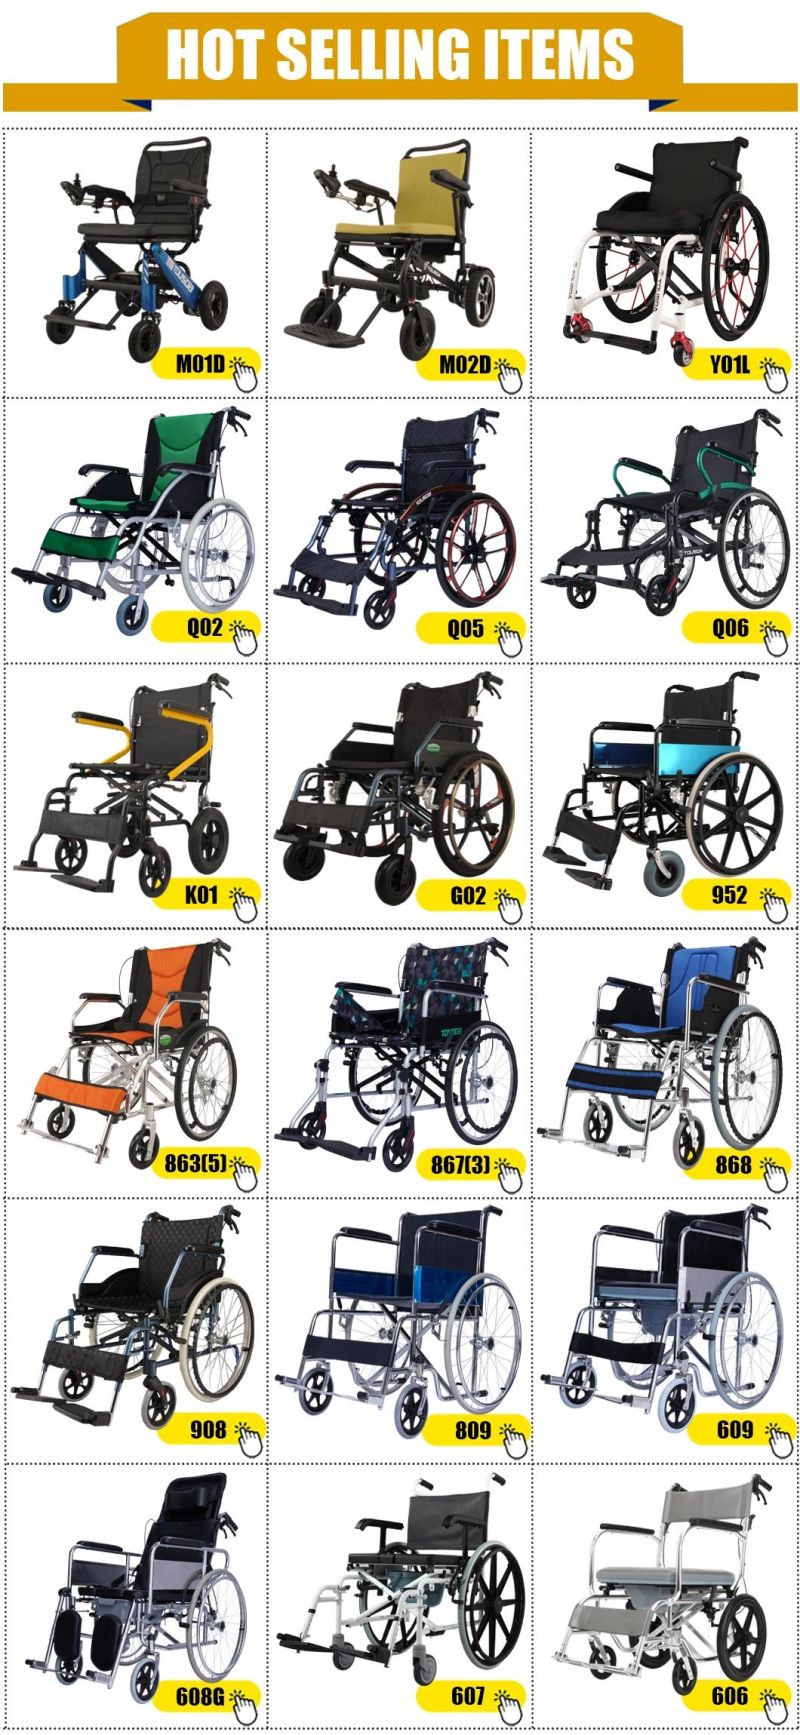 Factory Price Good Quality Aluminum Electric Rollator for Sale Walker